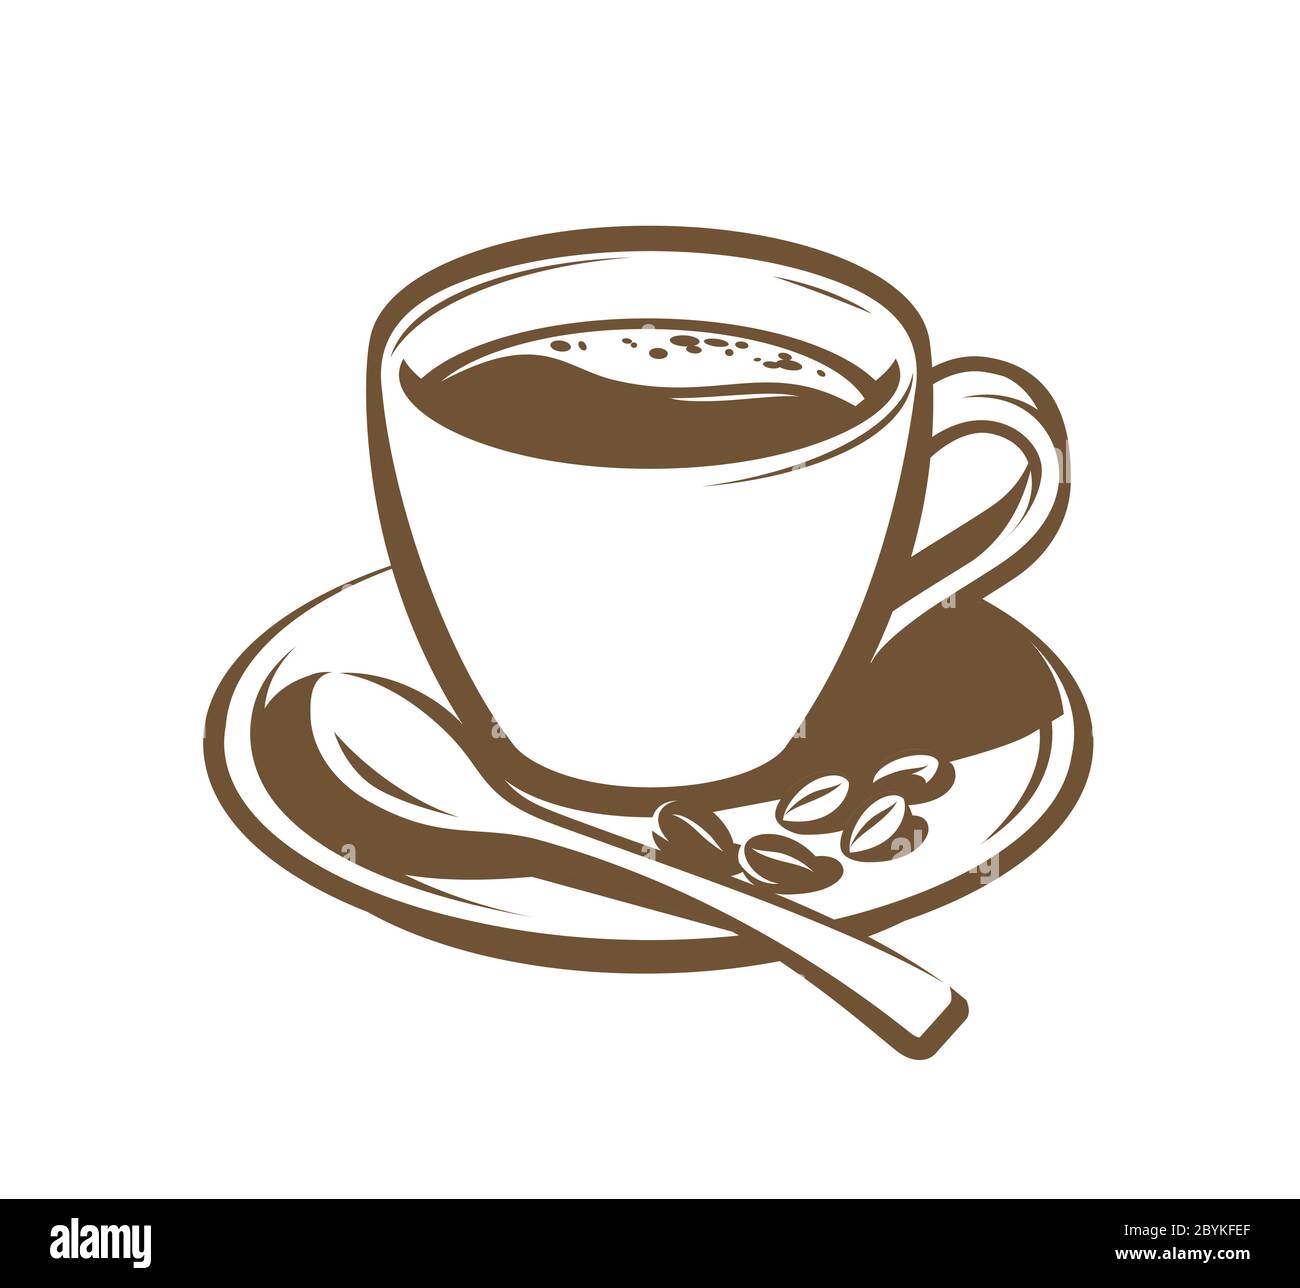 Cup of coffee retro. Vintage vector illustration. Menu design for cafe and restaurant Stock Vector